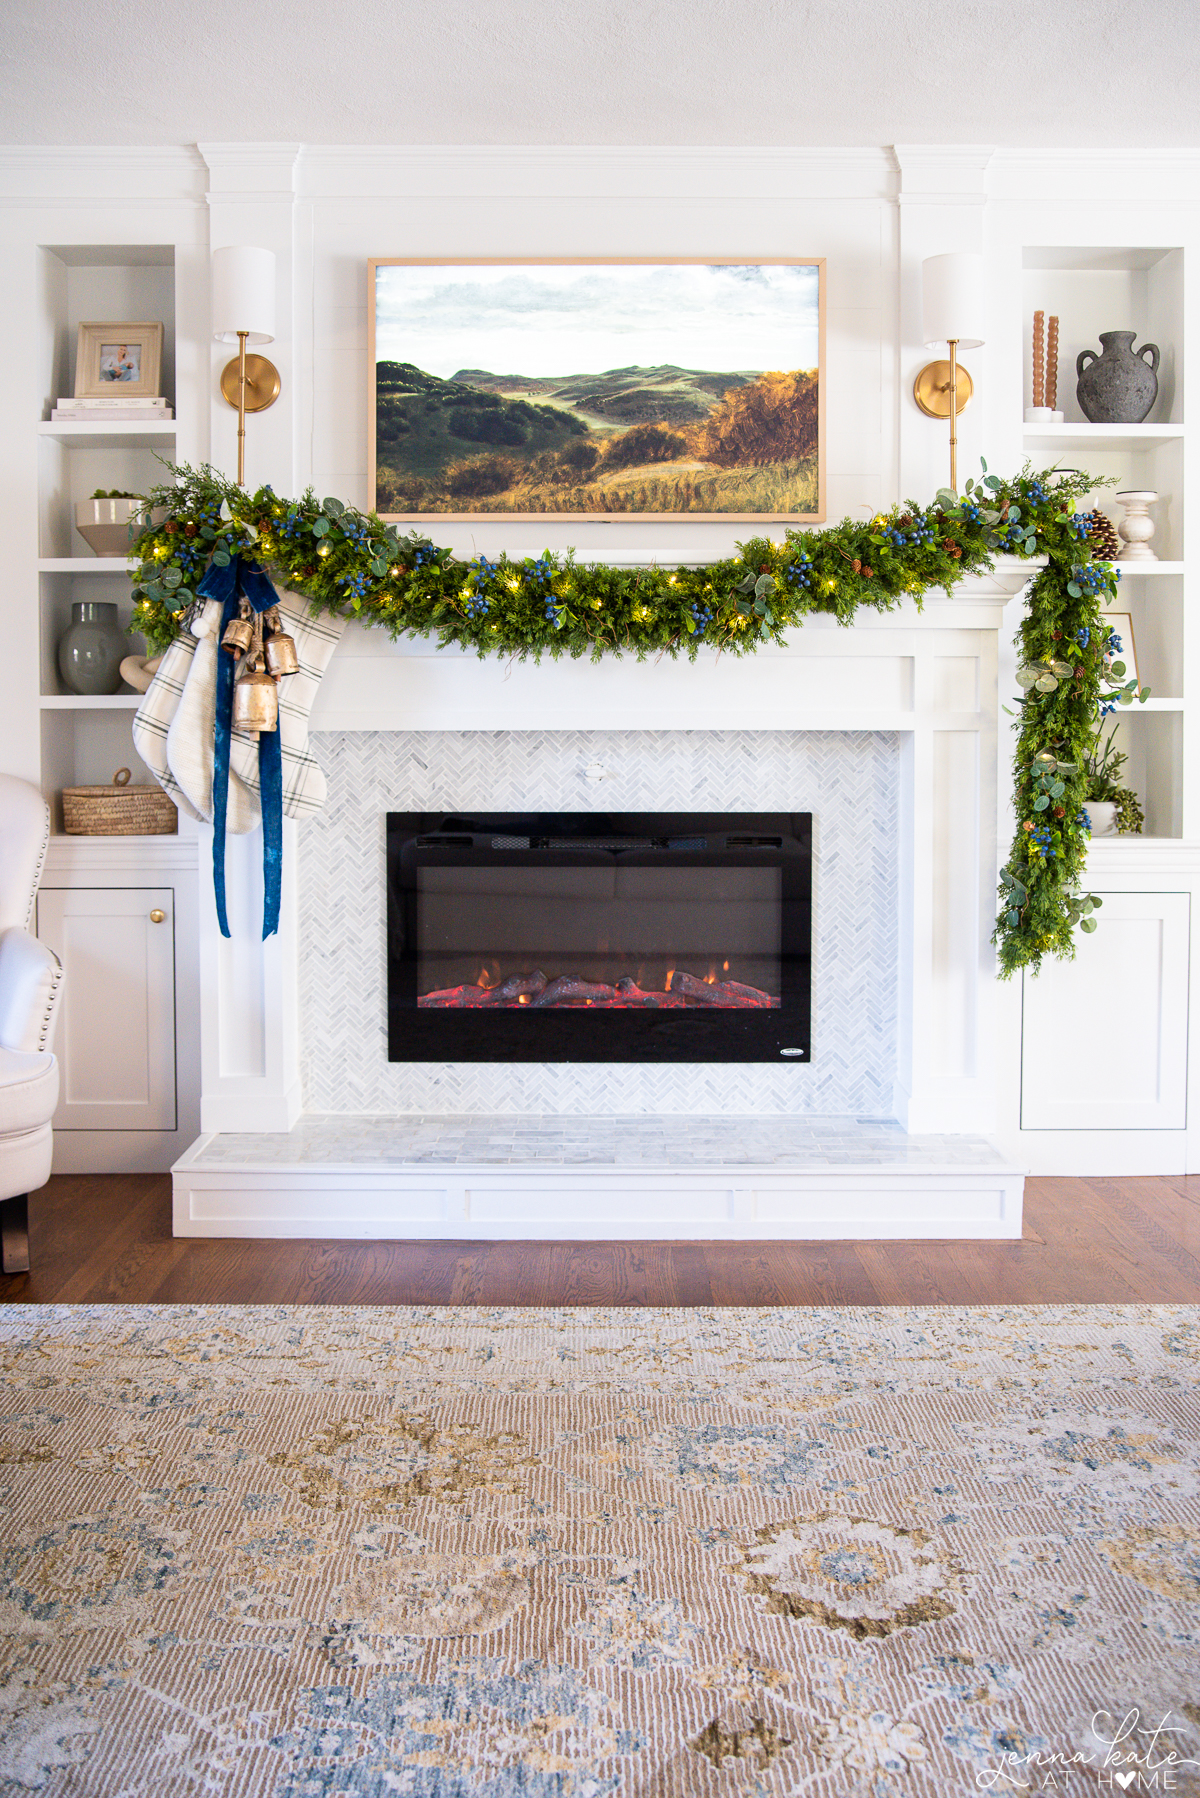 A view of a white fireplace and mantel decorated for Christmas with garland draped and gold bells hanging. Three stockings hang off the side.